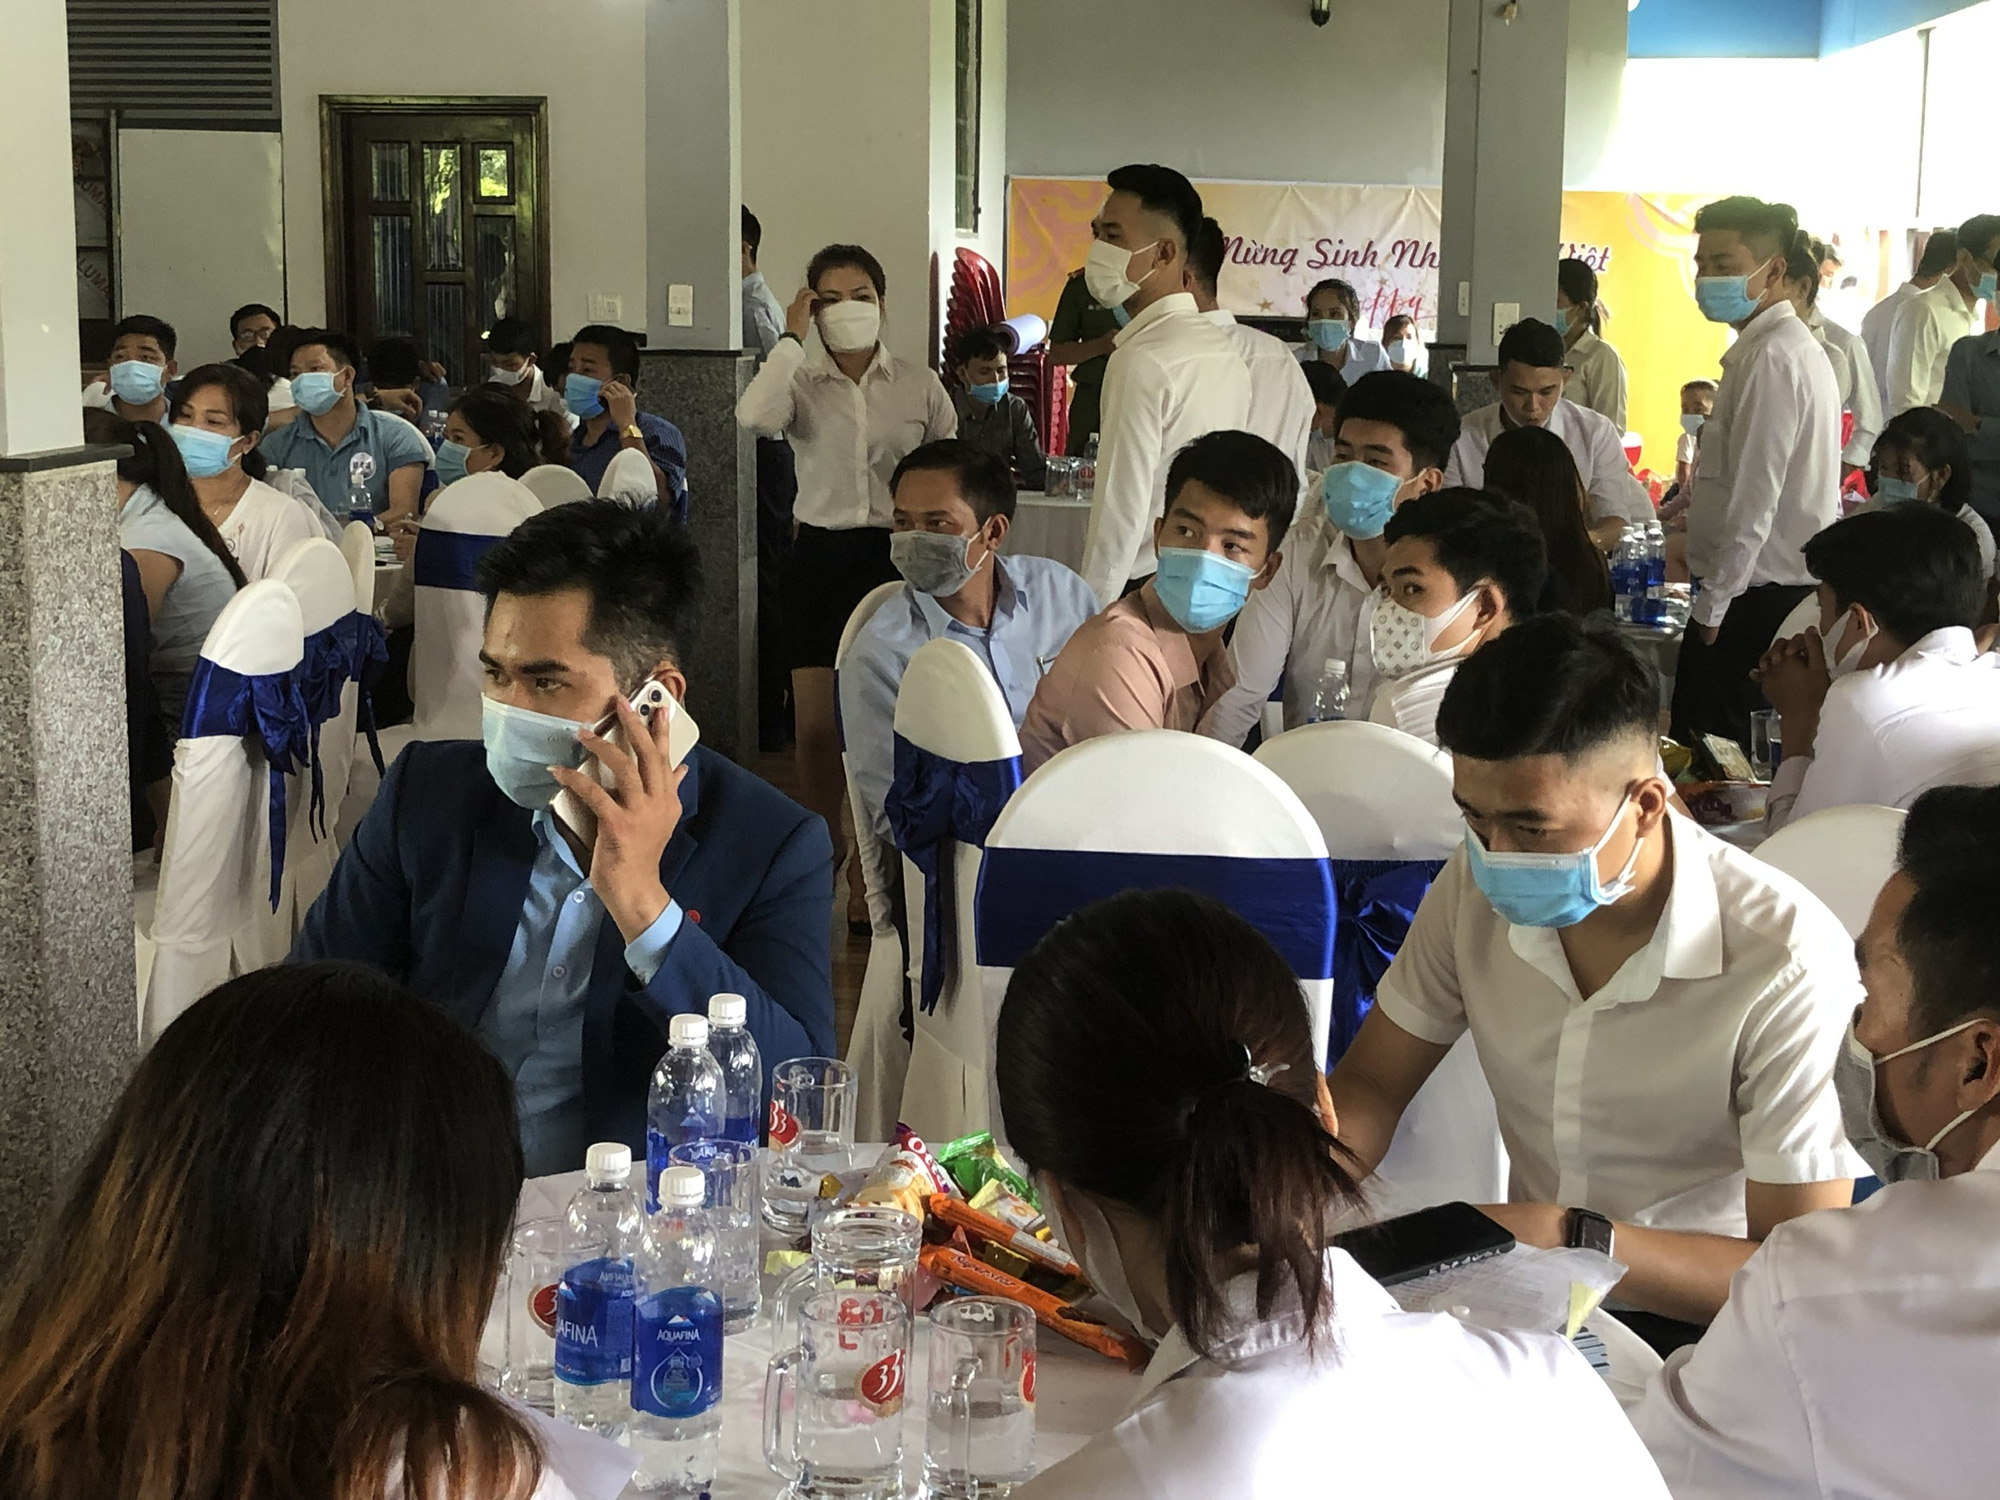 Company, 120 people fined $14,000 for large gathering despite COVID-19 in southern Vietnam